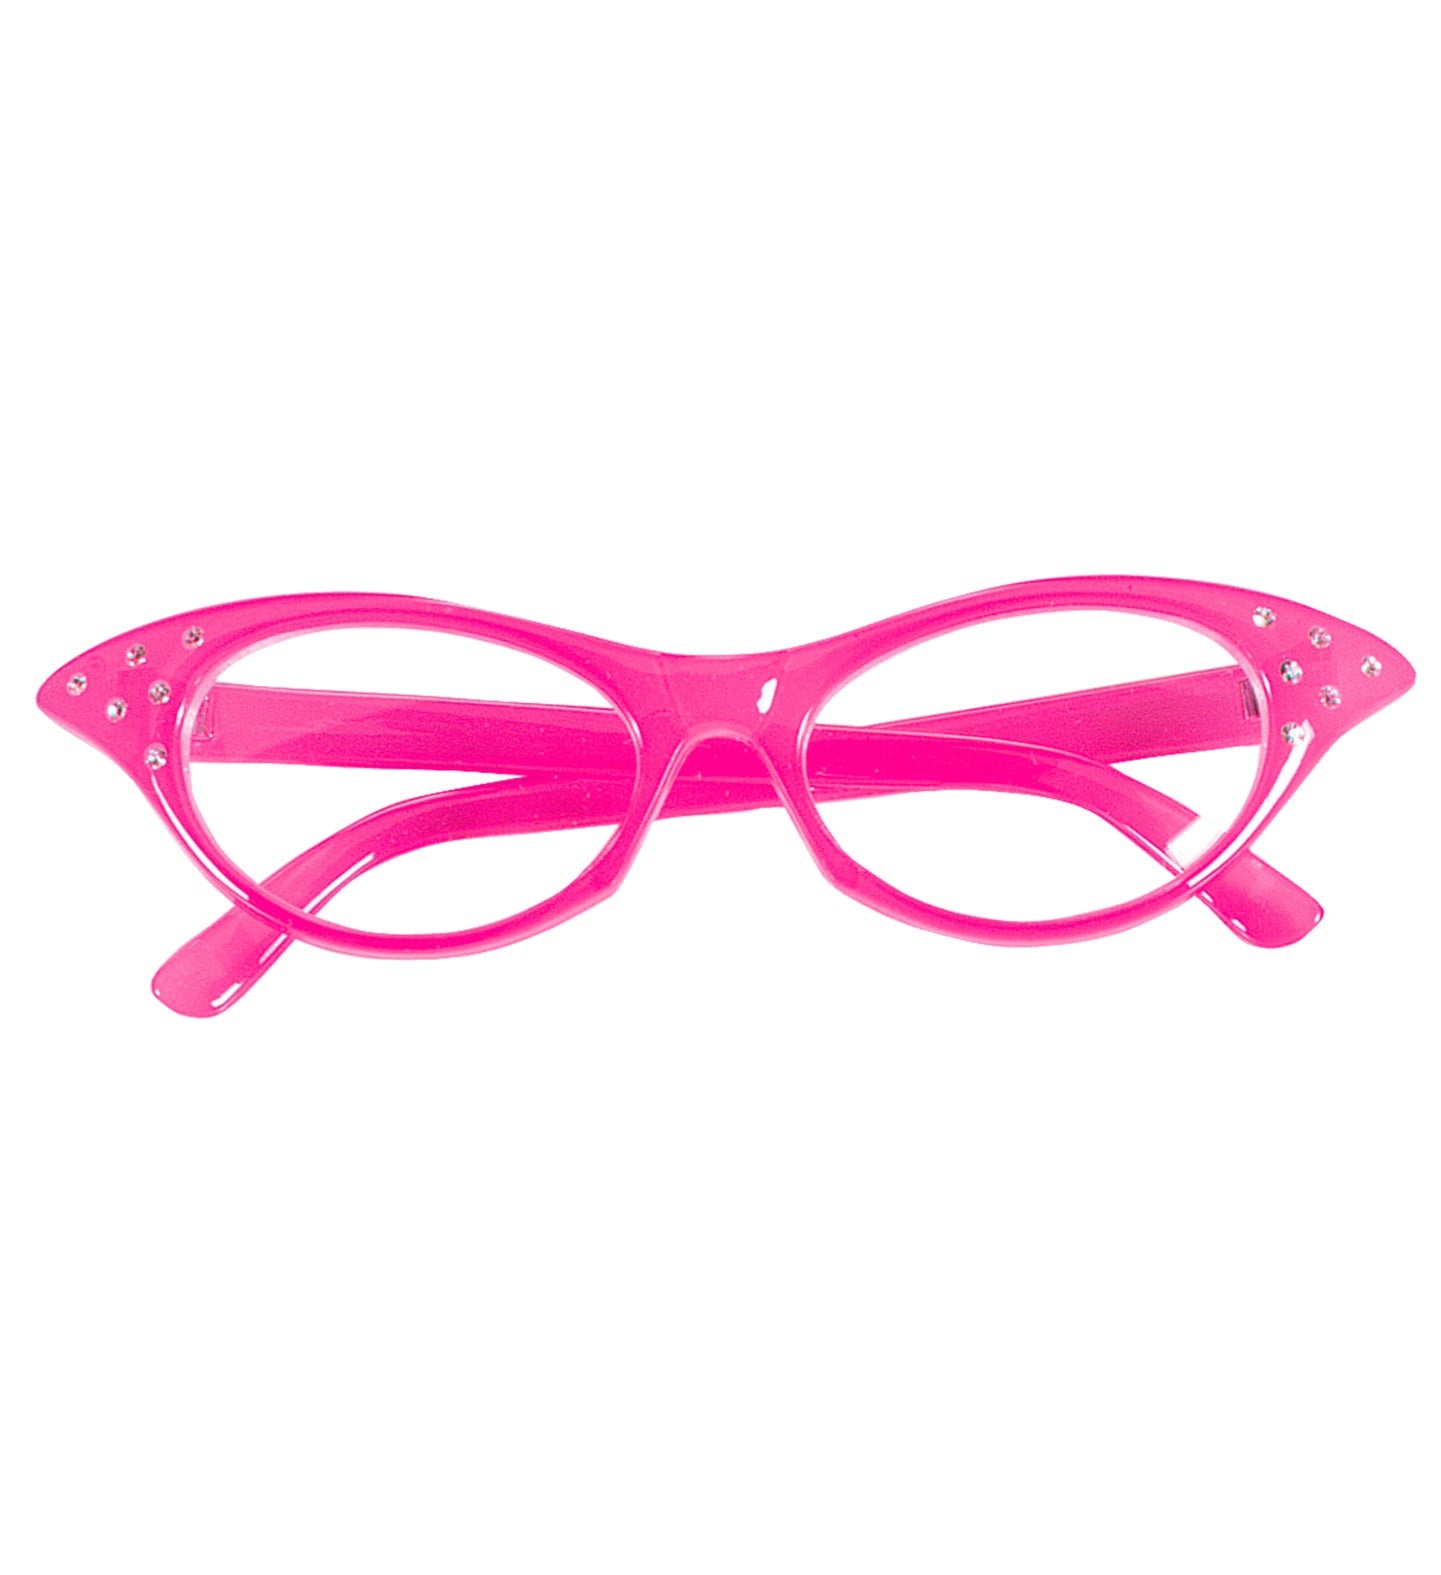 1950's Glasses Pink Costume Accessory